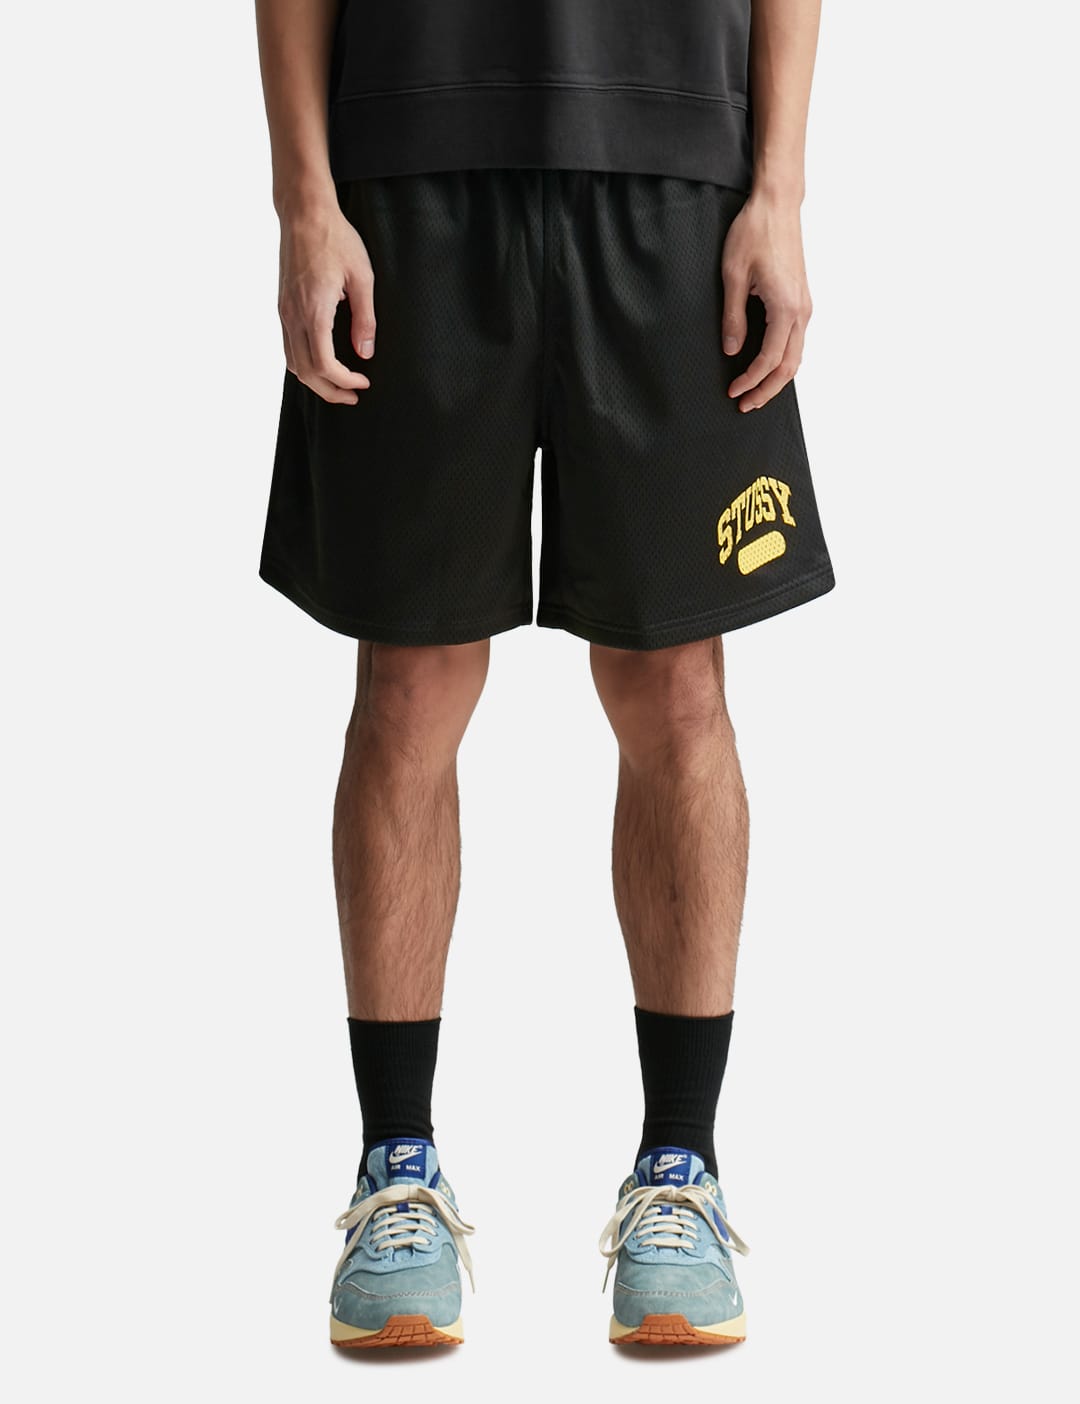 Stüssy - Arch Mesh Shorts | HBX - Globally Curated Fashion and